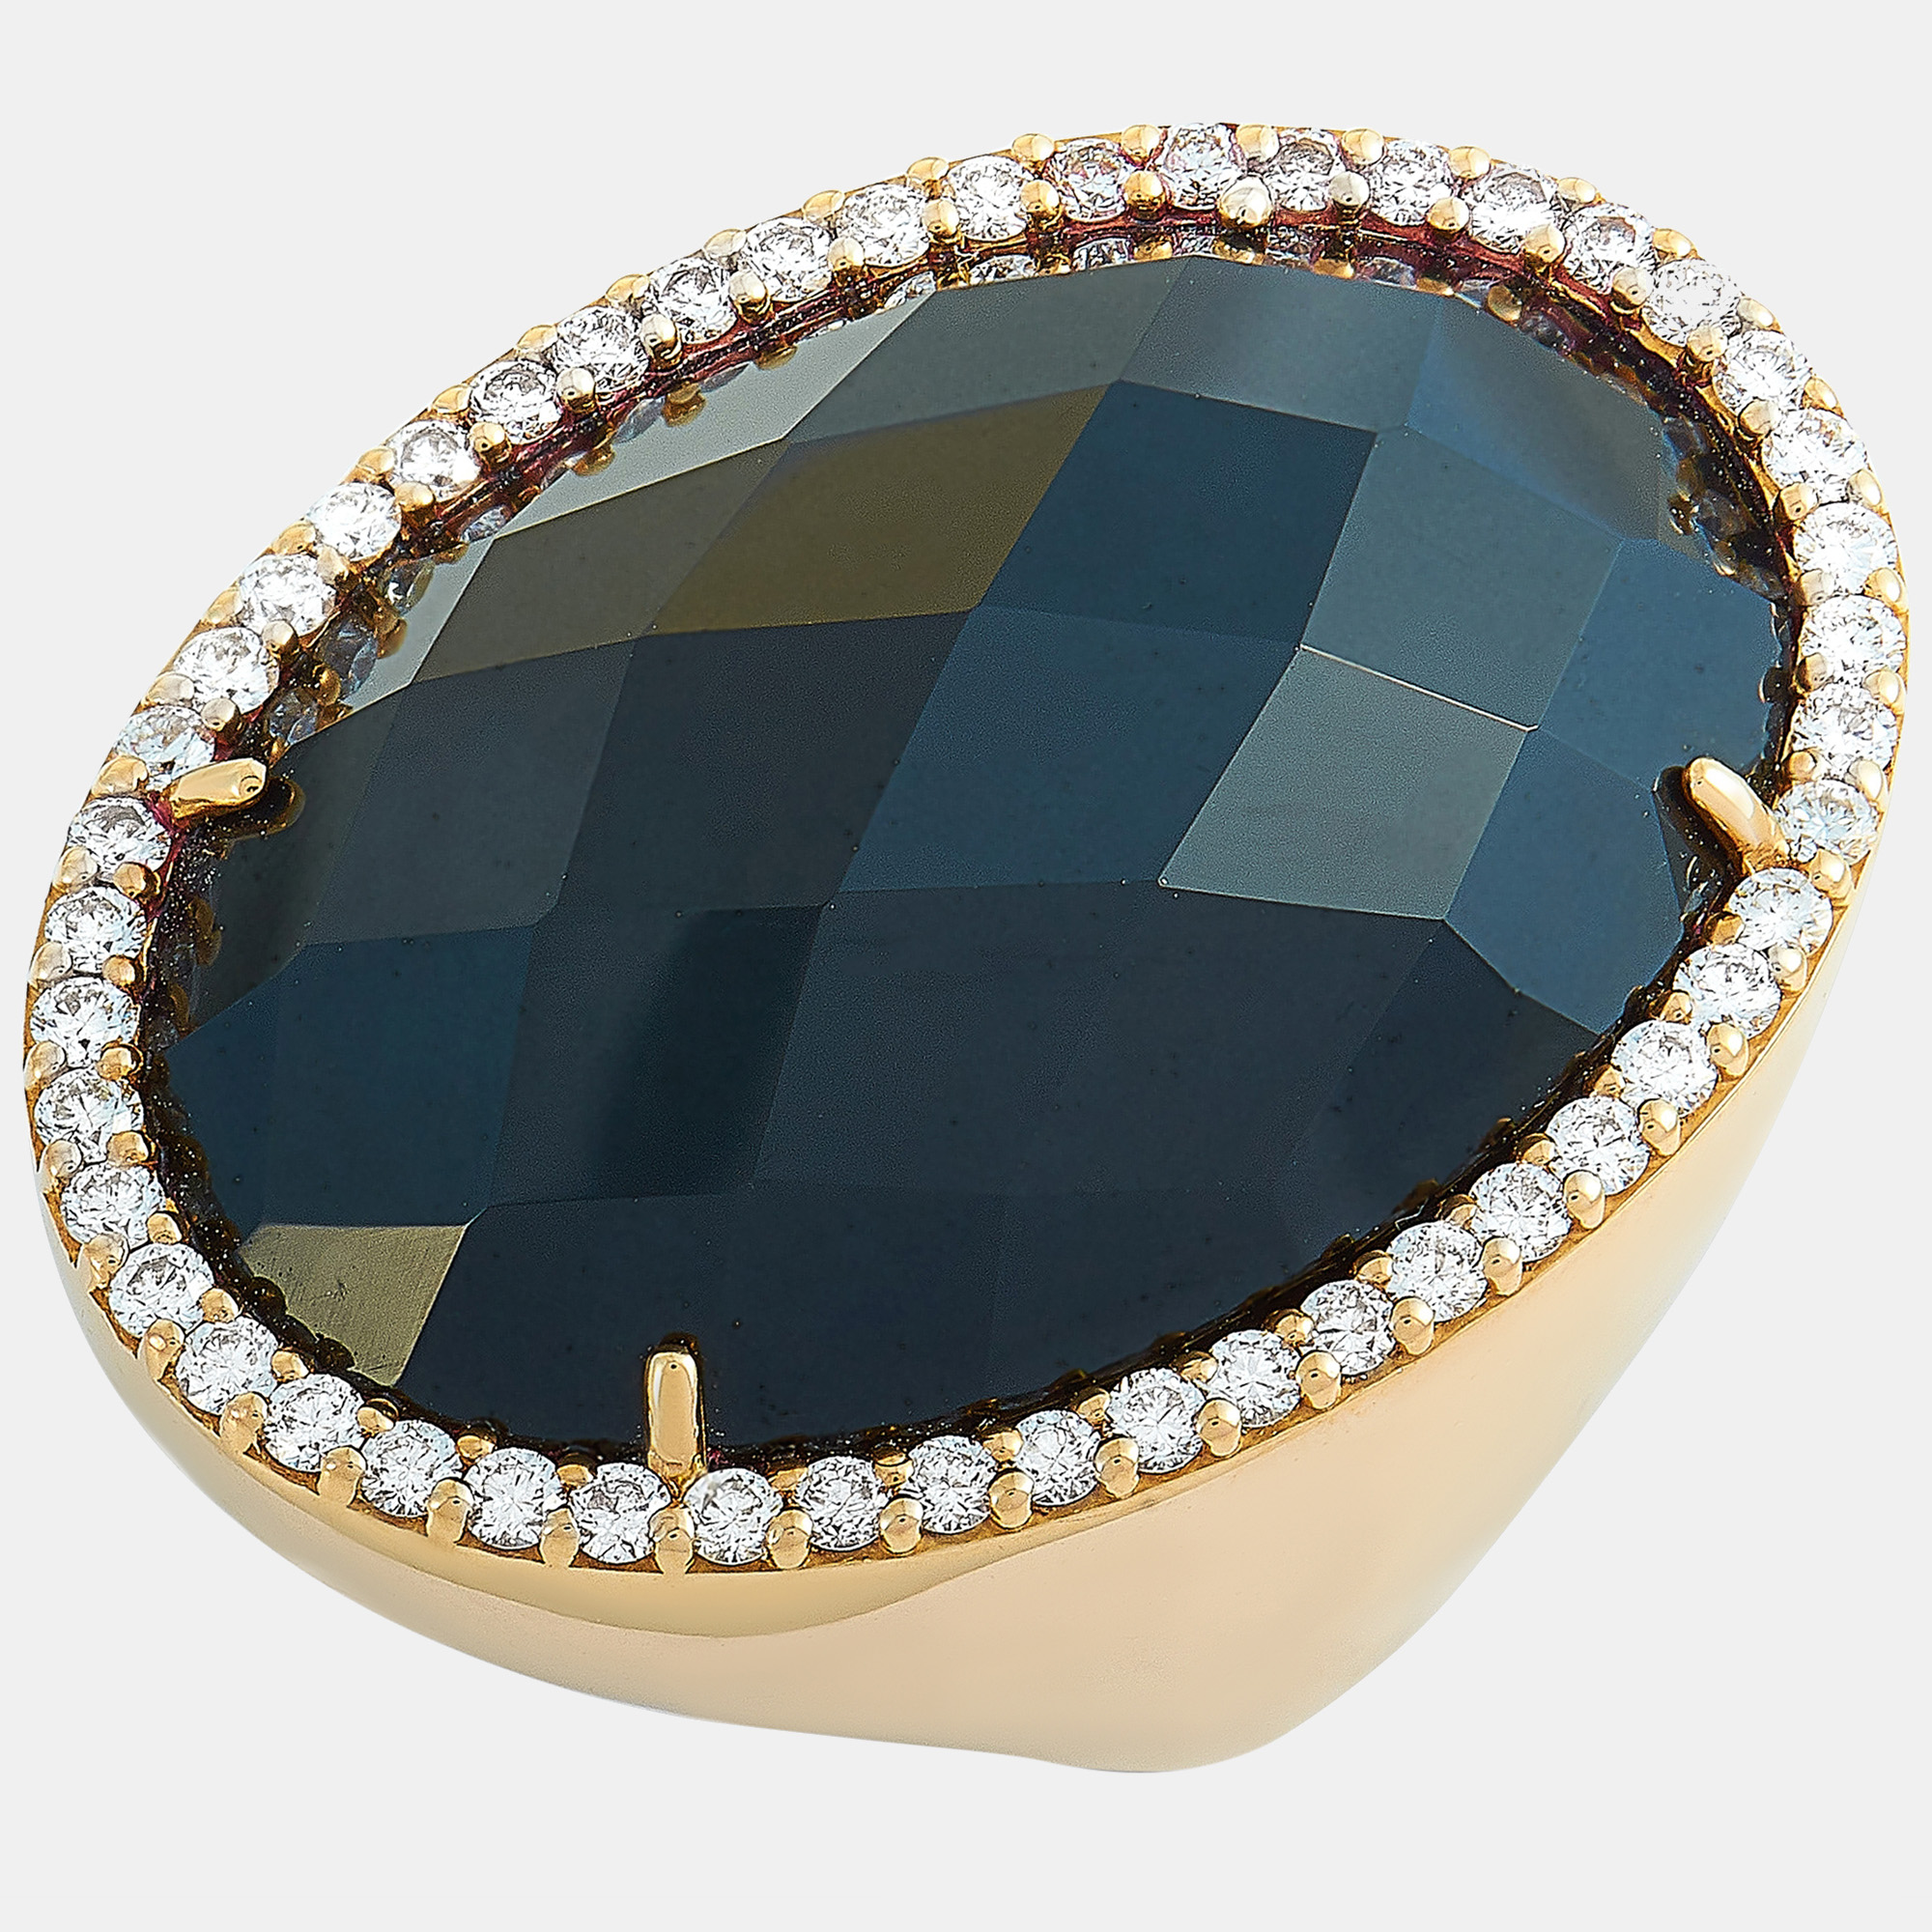 Roberto coin cocktail 18k rose gold diamond and onyx ring